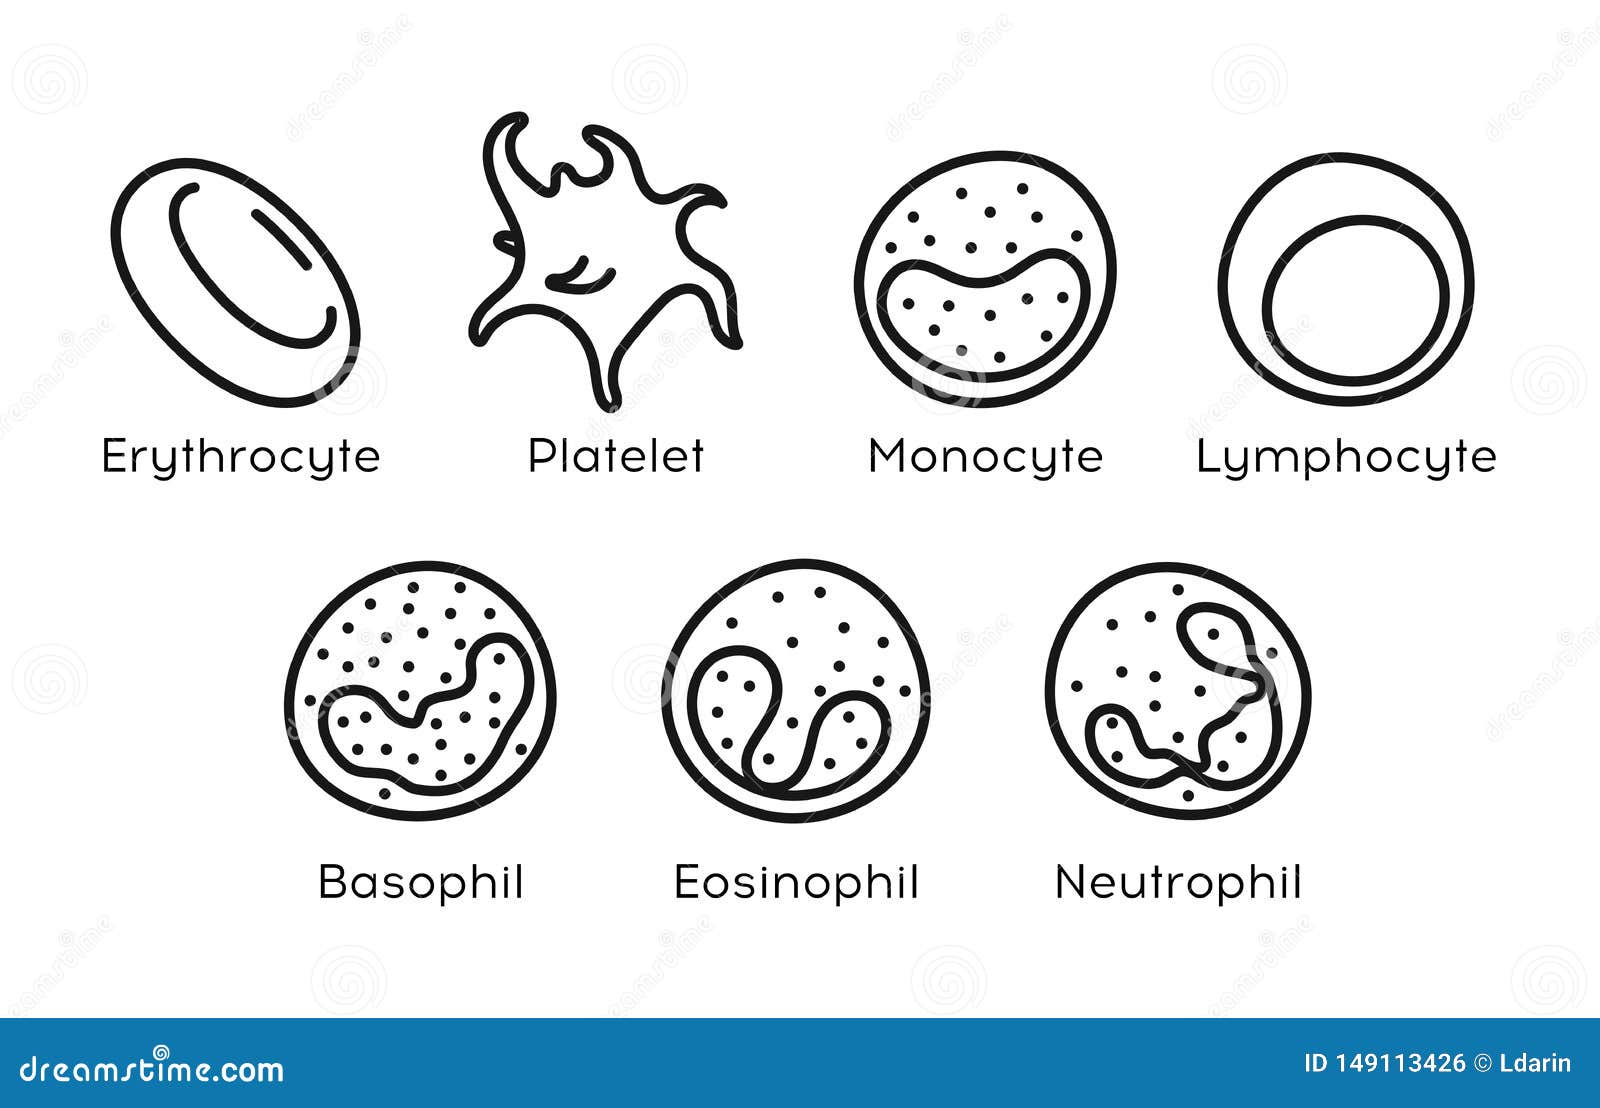  types of blood cells.